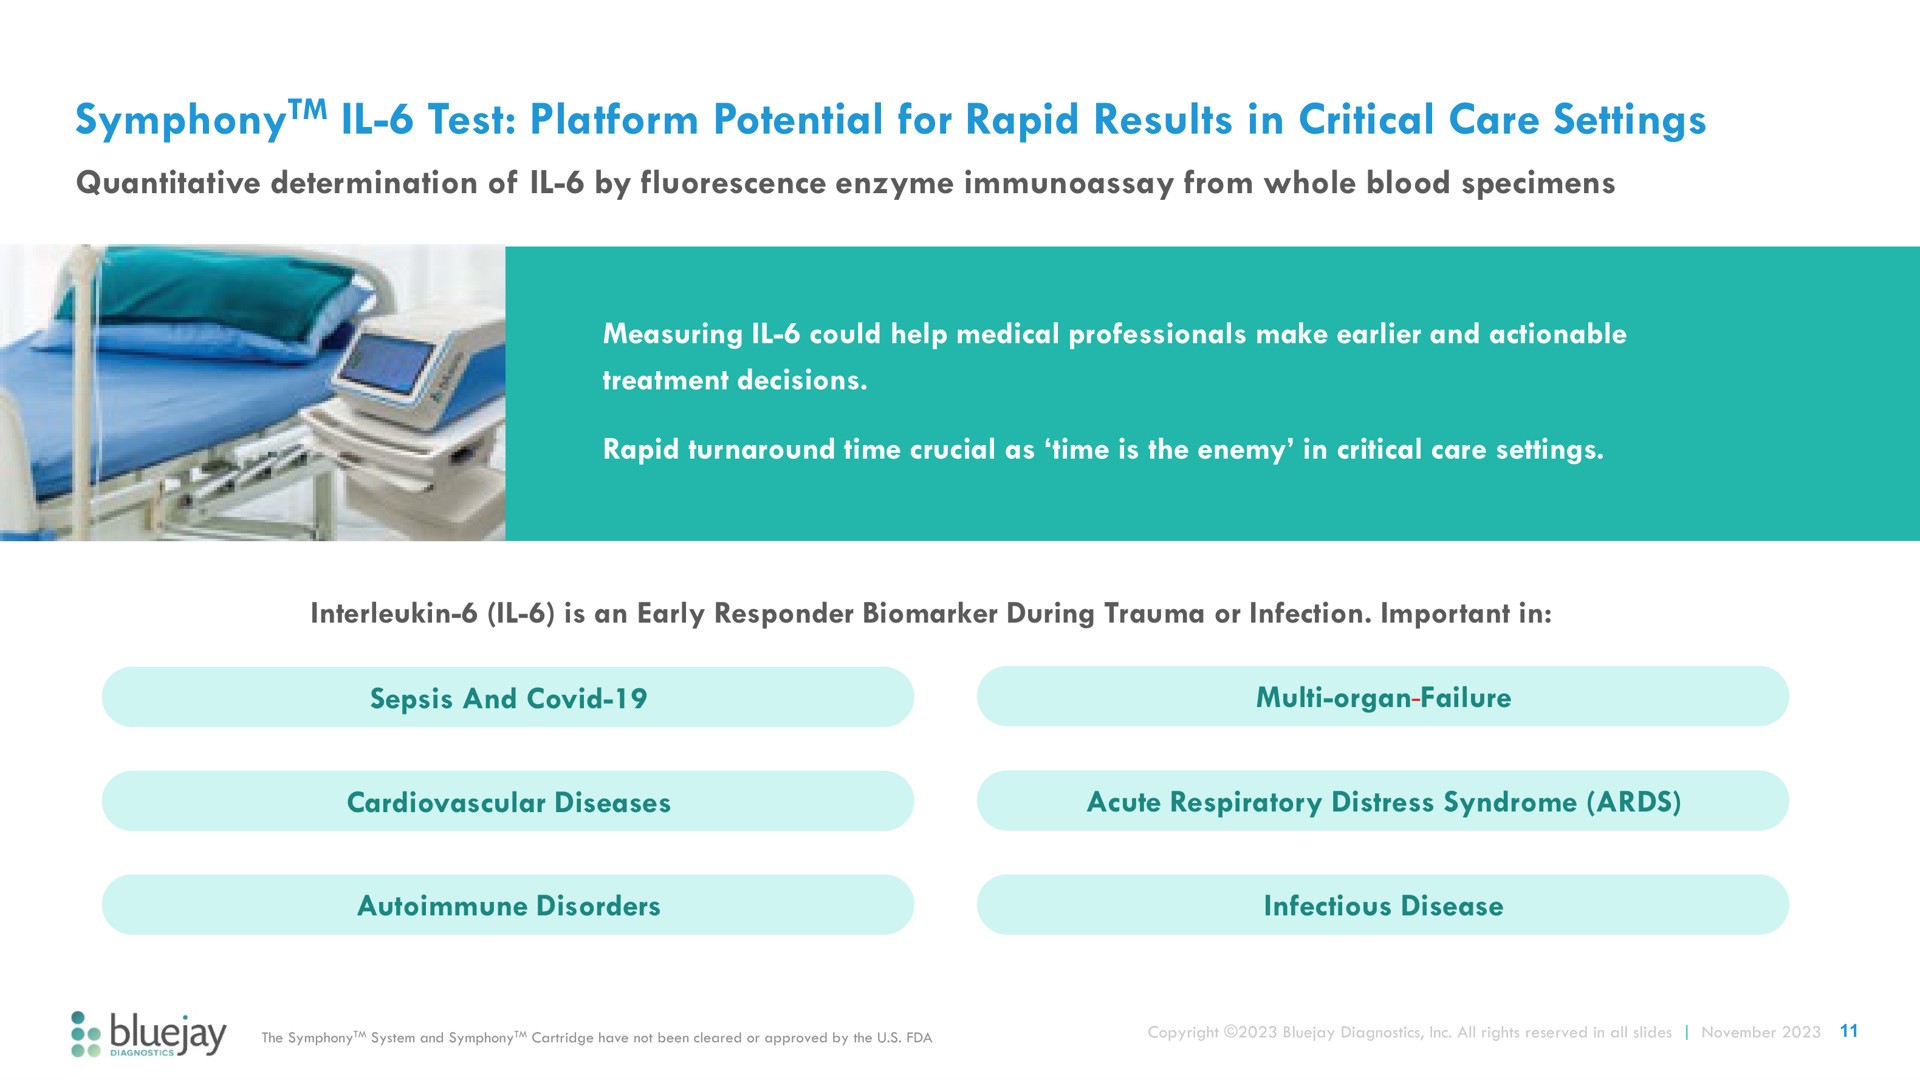 test platform potential for rapid results in critical care settings symphony | Bluejay